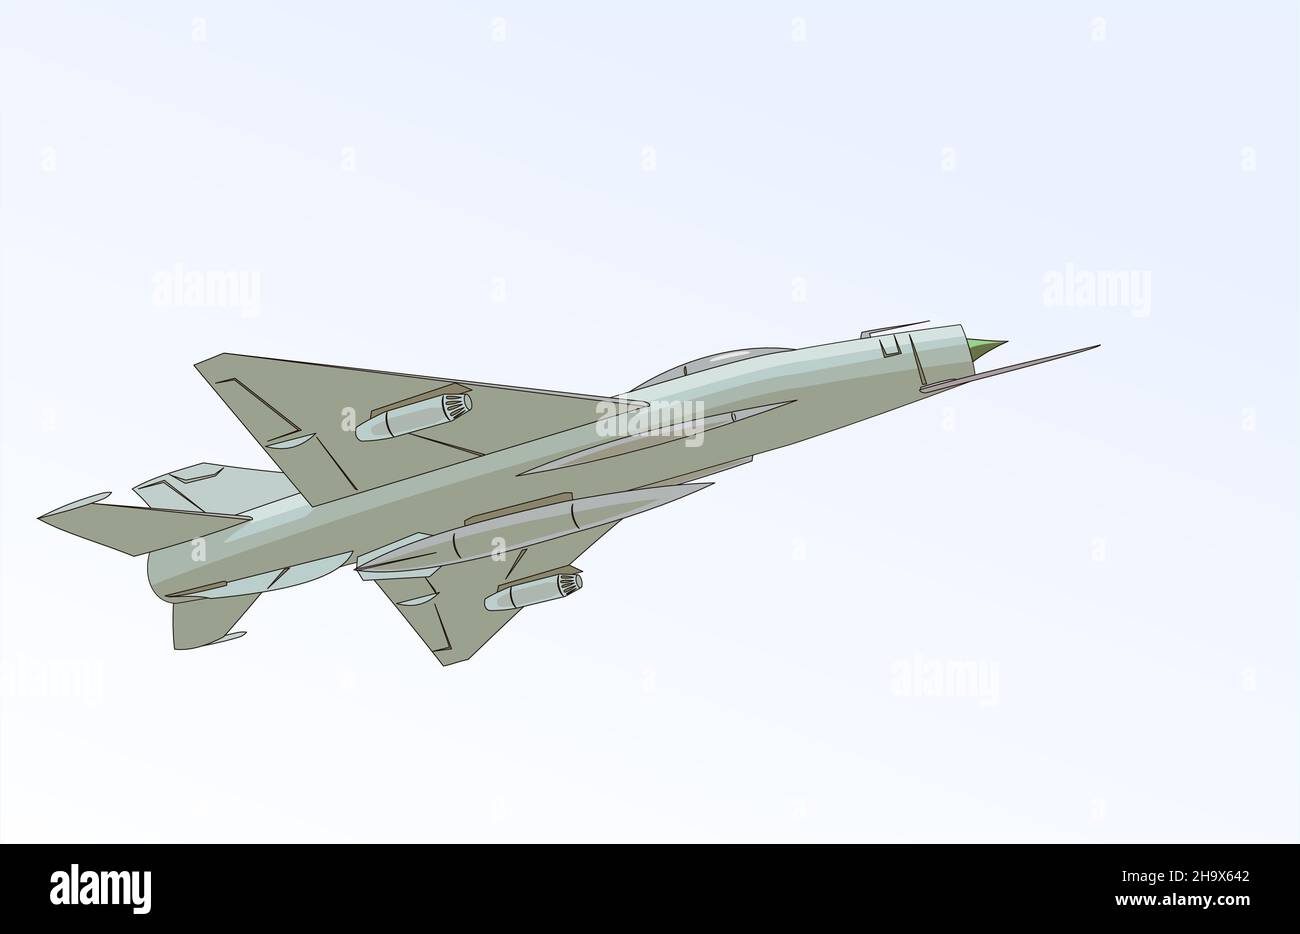 The Mikoyan-Gurevich MiG-21 (Fishbed) is a supersonic jet fighter aircraft, designed by the Mikoyan-Gurevich Design Bureau in the Soviet Union. Stock Vector